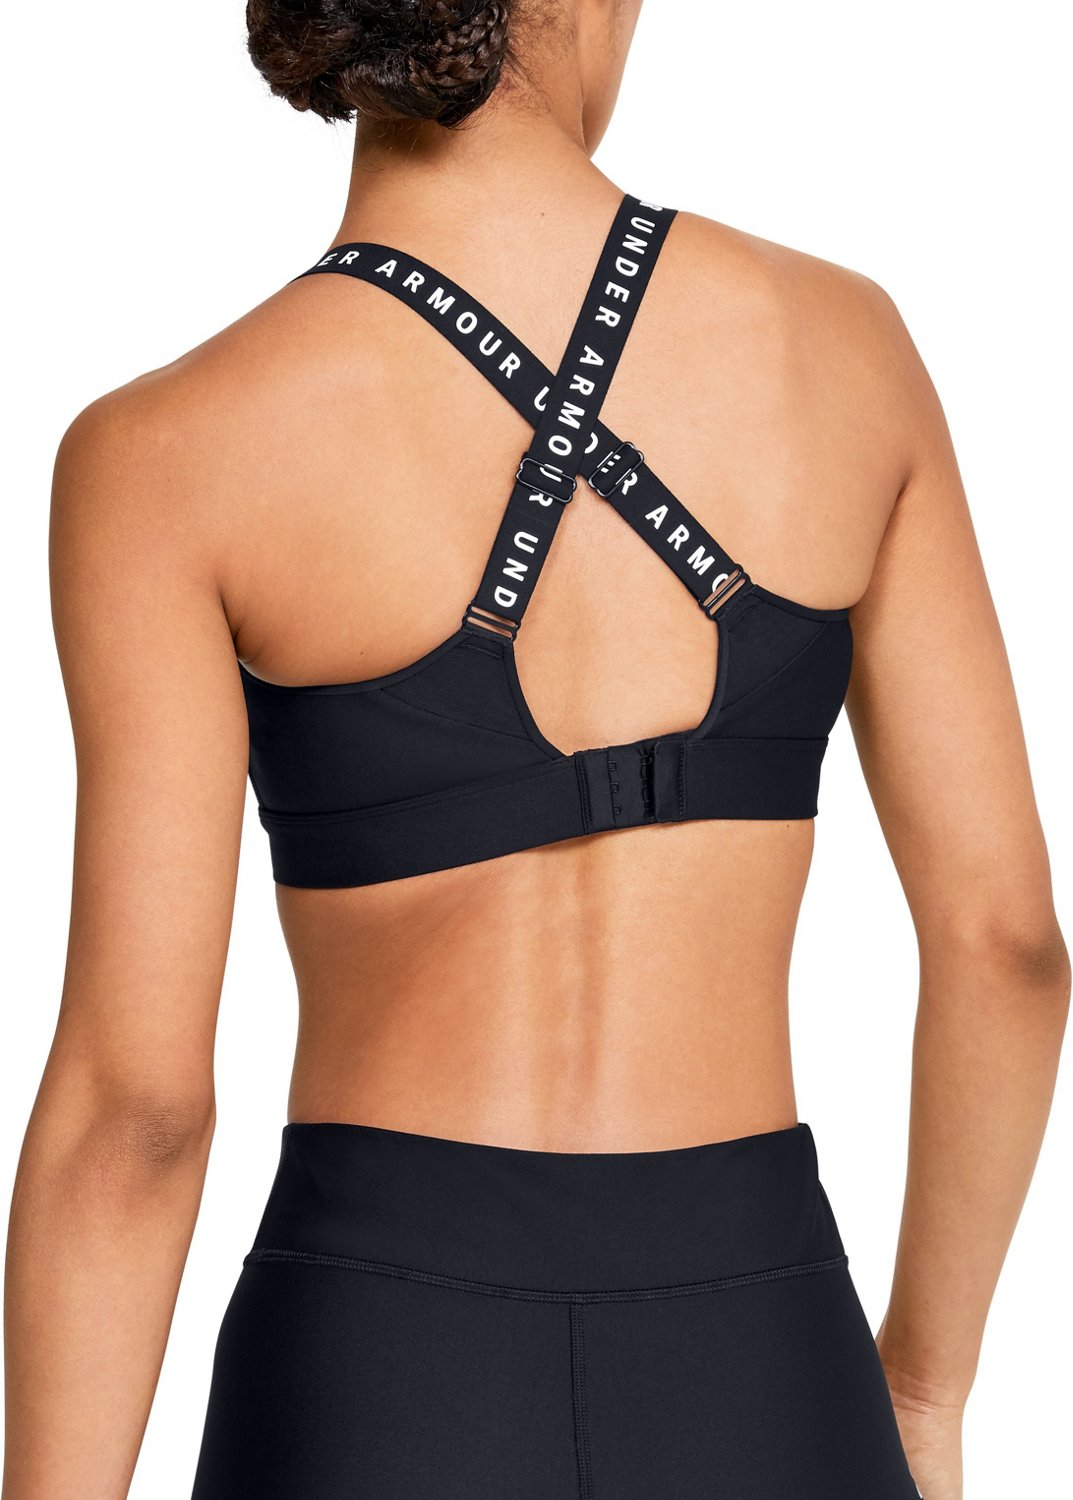 Under Armour Womens Infinity High Support Sports Bra - Black